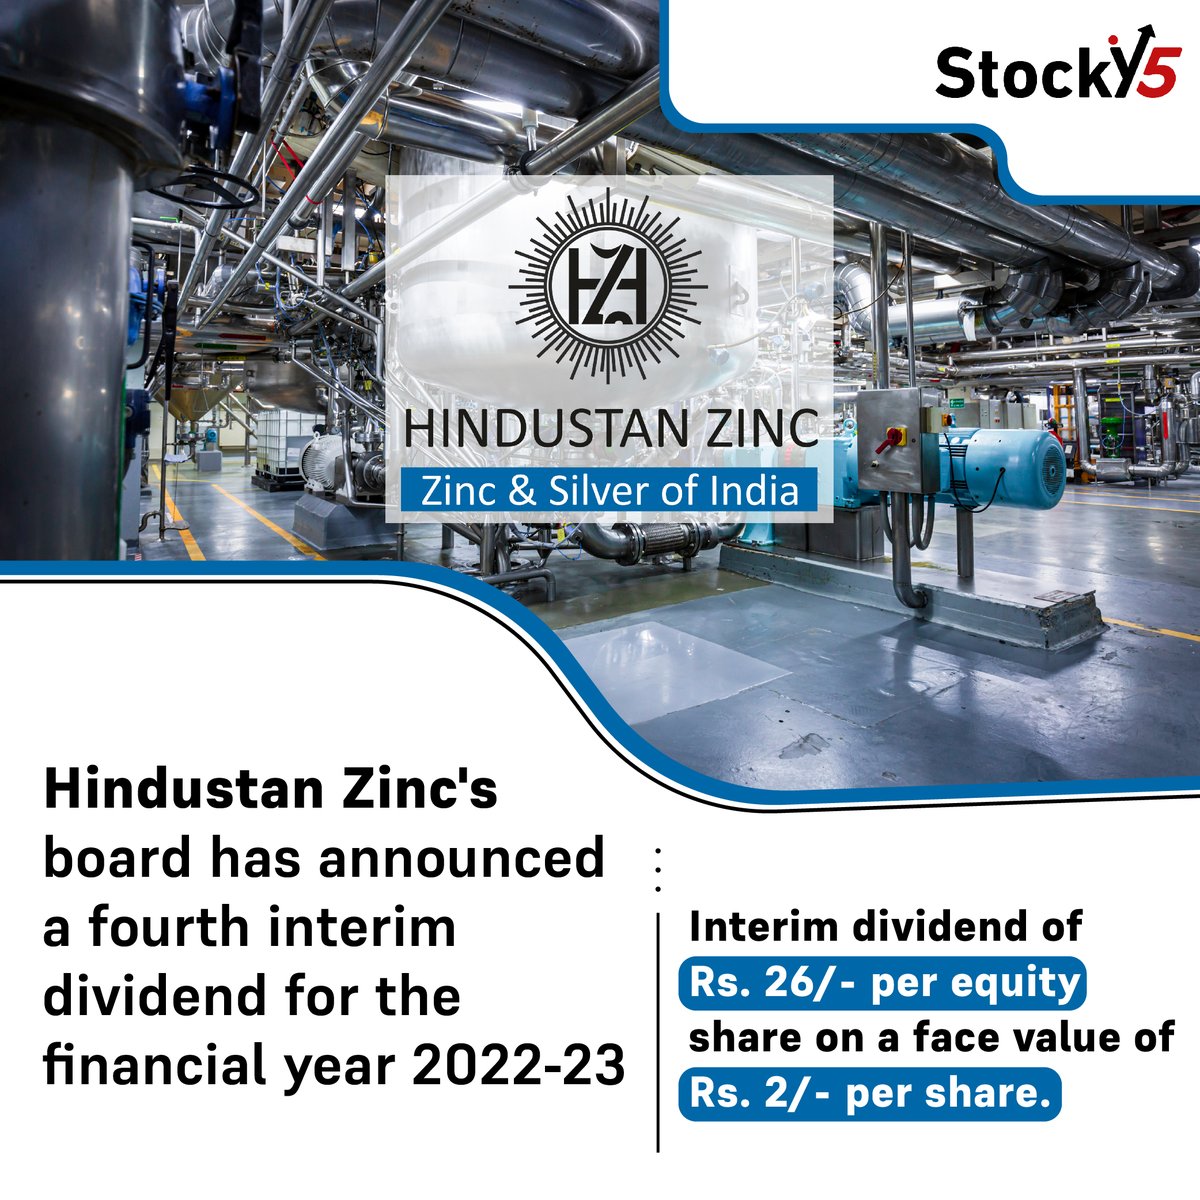 #HindustanZinc delivers strong returns with 4th interim dividend, reaffirming its commitment to creating long-term value for shareholders. 

If you like the content that we are sharing, follow #Stocky5 right away. 

#StockMarket #InterimDividend #Dividend #StockMarketIndia